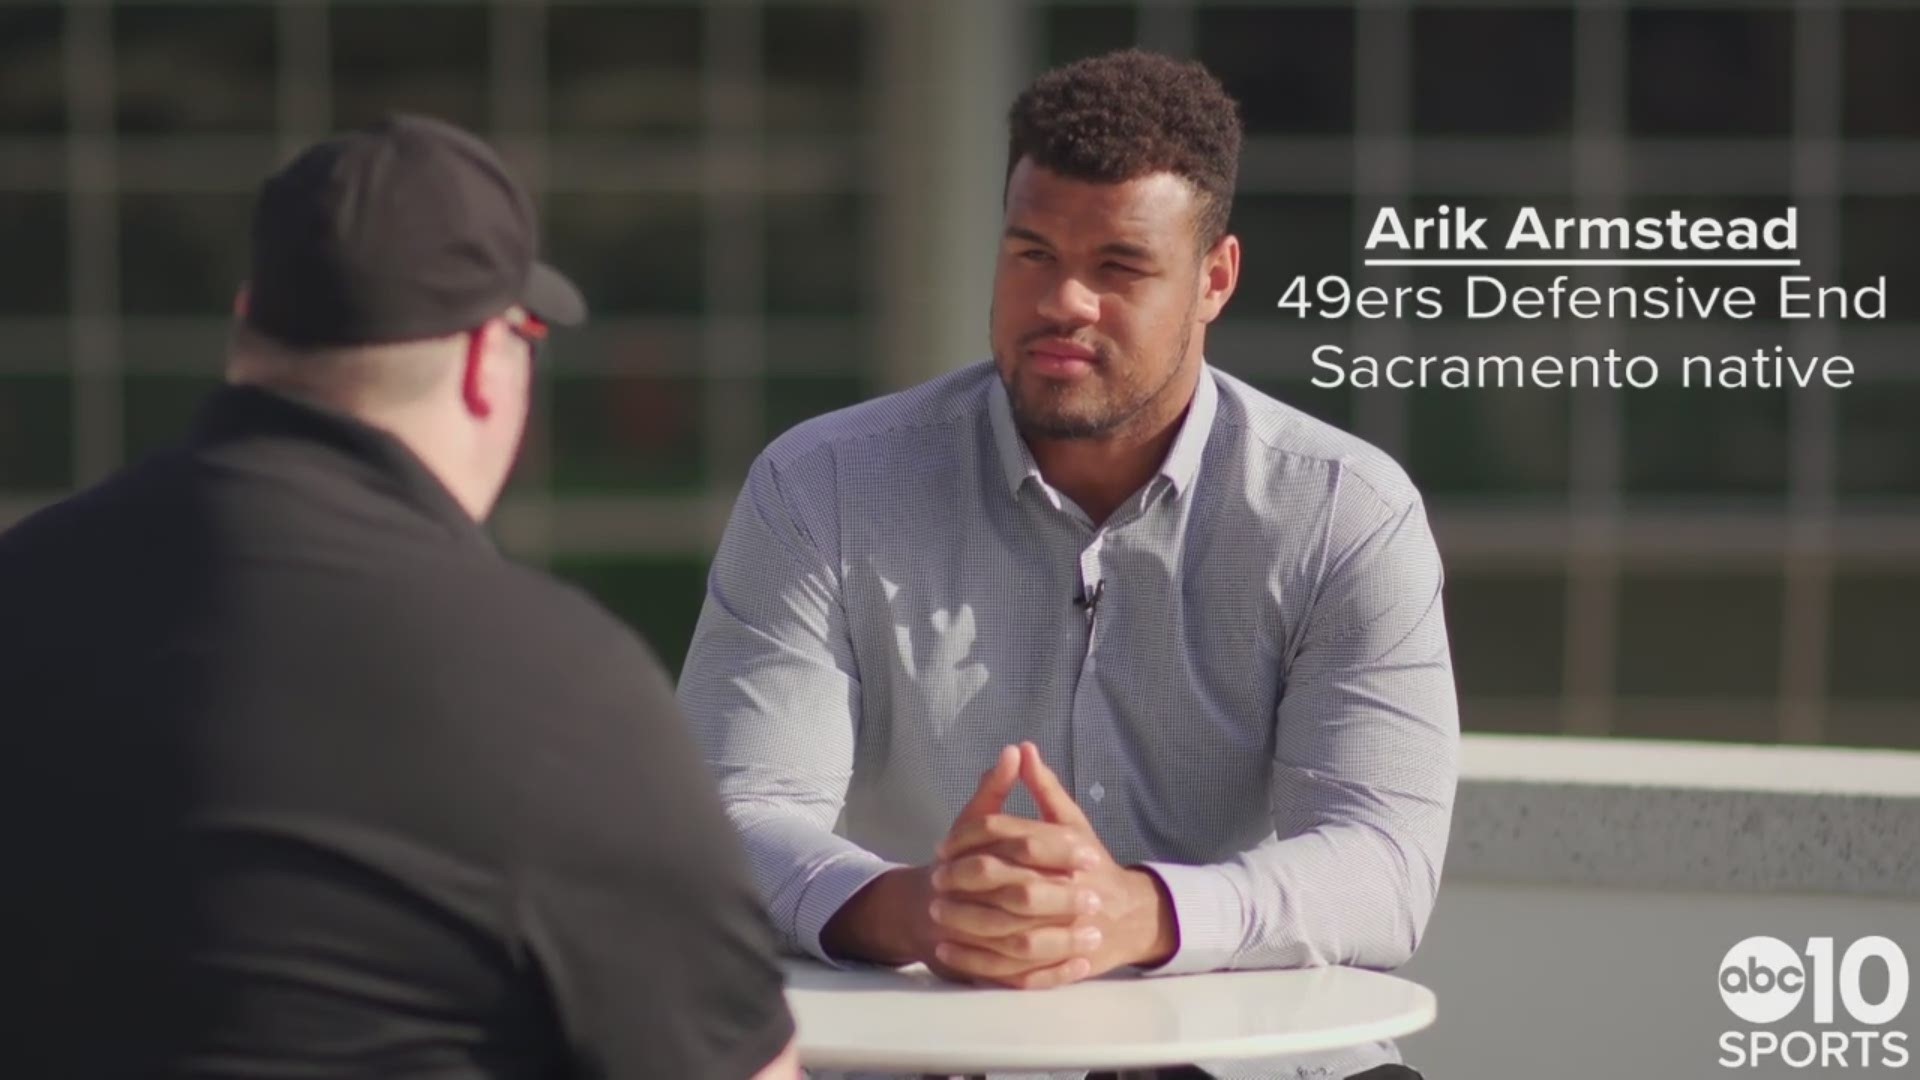 San Francisco 49ers defensive end Arik Armstead, a Sacramento native, talks to ABC10's Sean Cunningham about the individual success of last season, the additions of Dee Ford and Joey Bosa, the outside noise about his future with the Niners, and bringing another charity weekend back to his hometown.